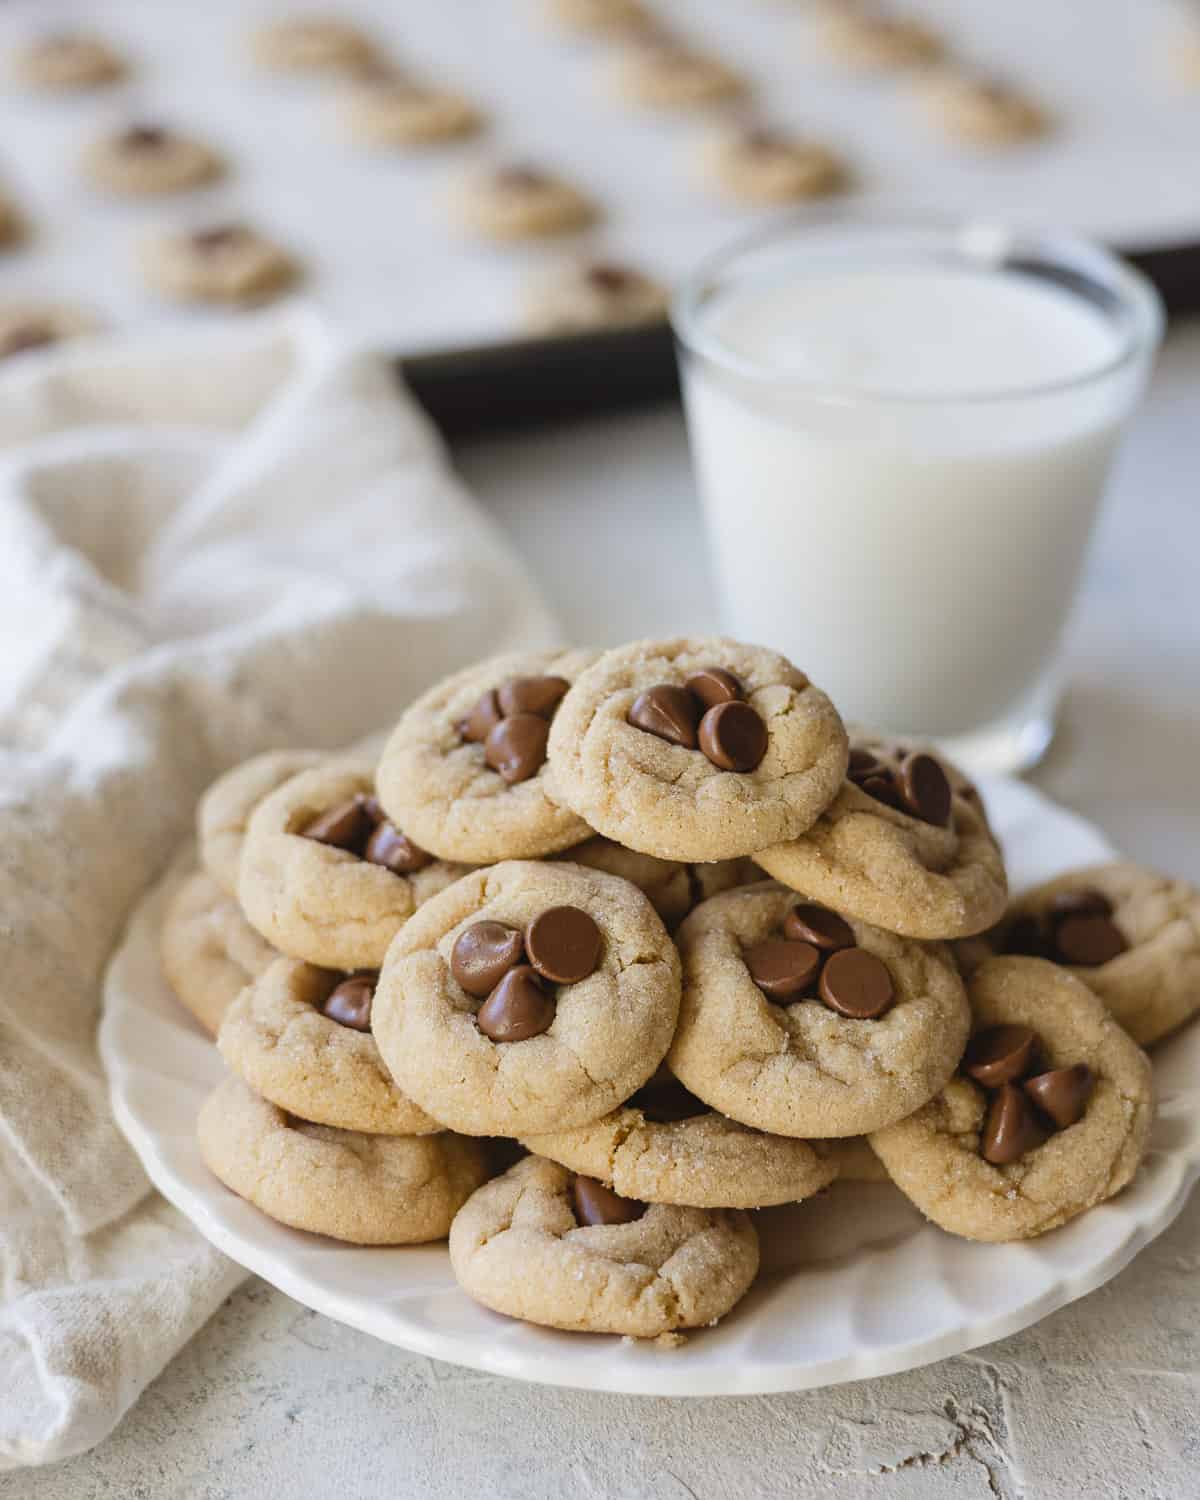 A small plate of mini cookies and a glass of milk.